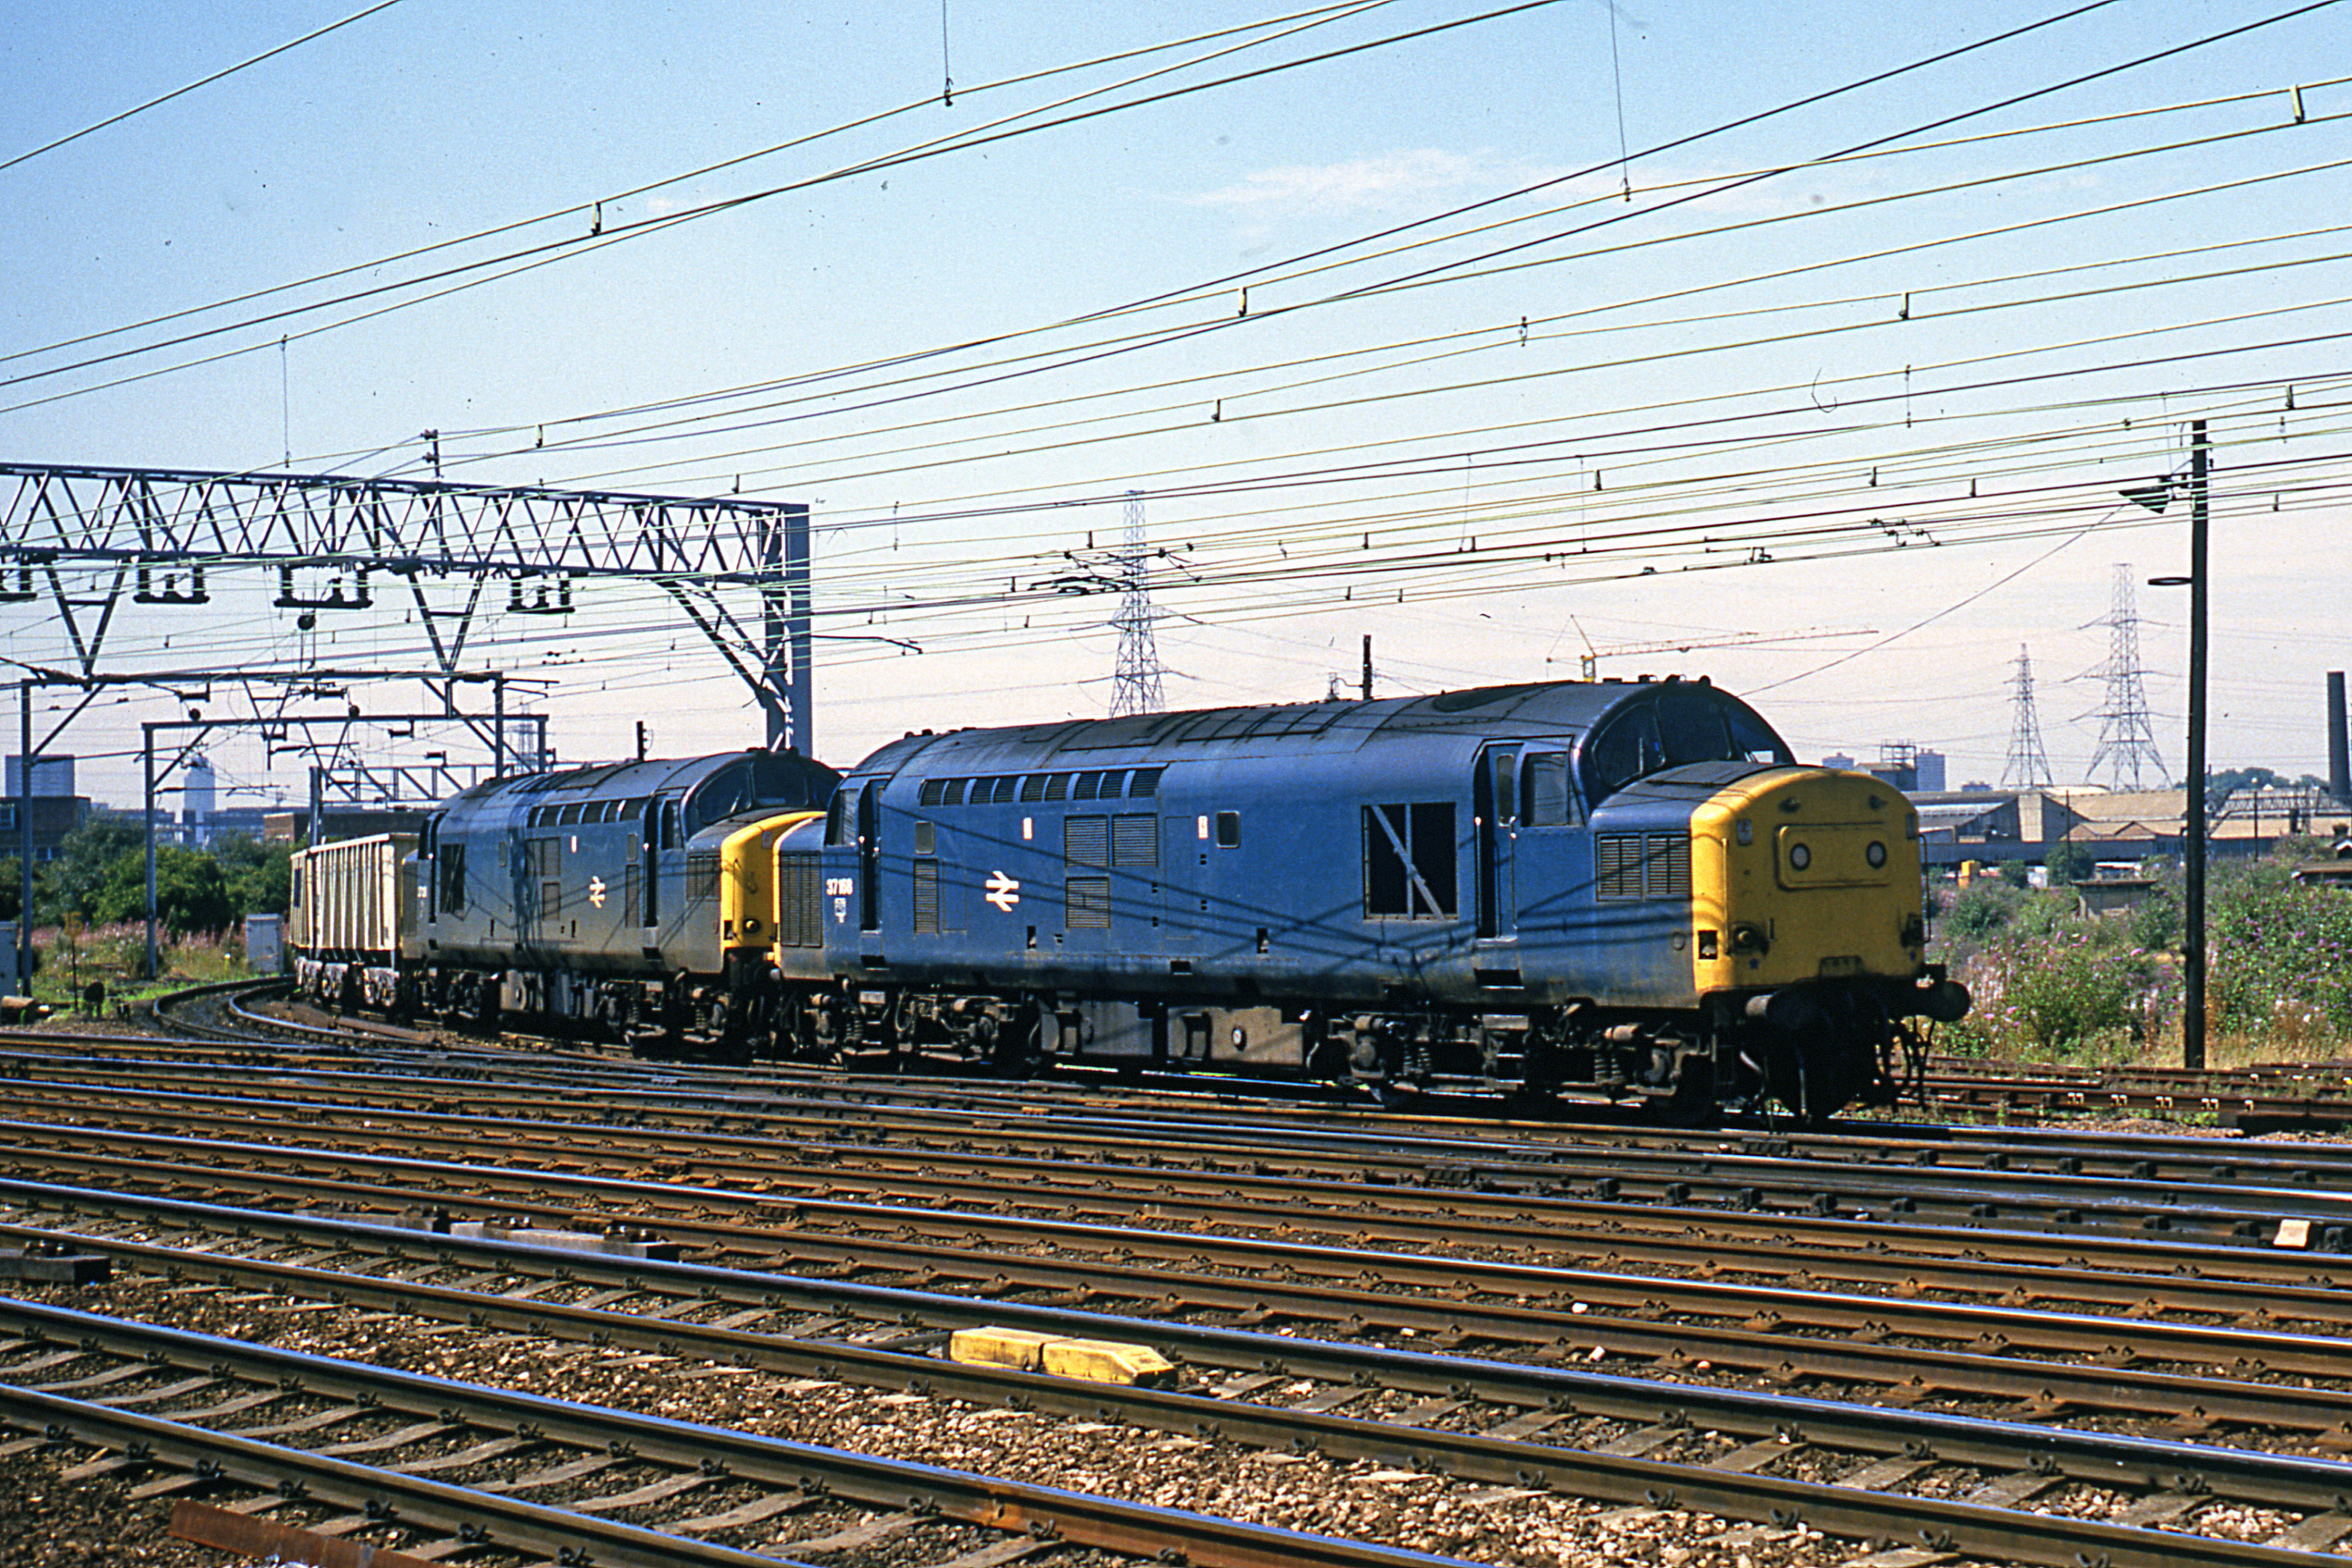 37168 double-heading a stone train at Stratford in August 1986. Colour-Rail.com